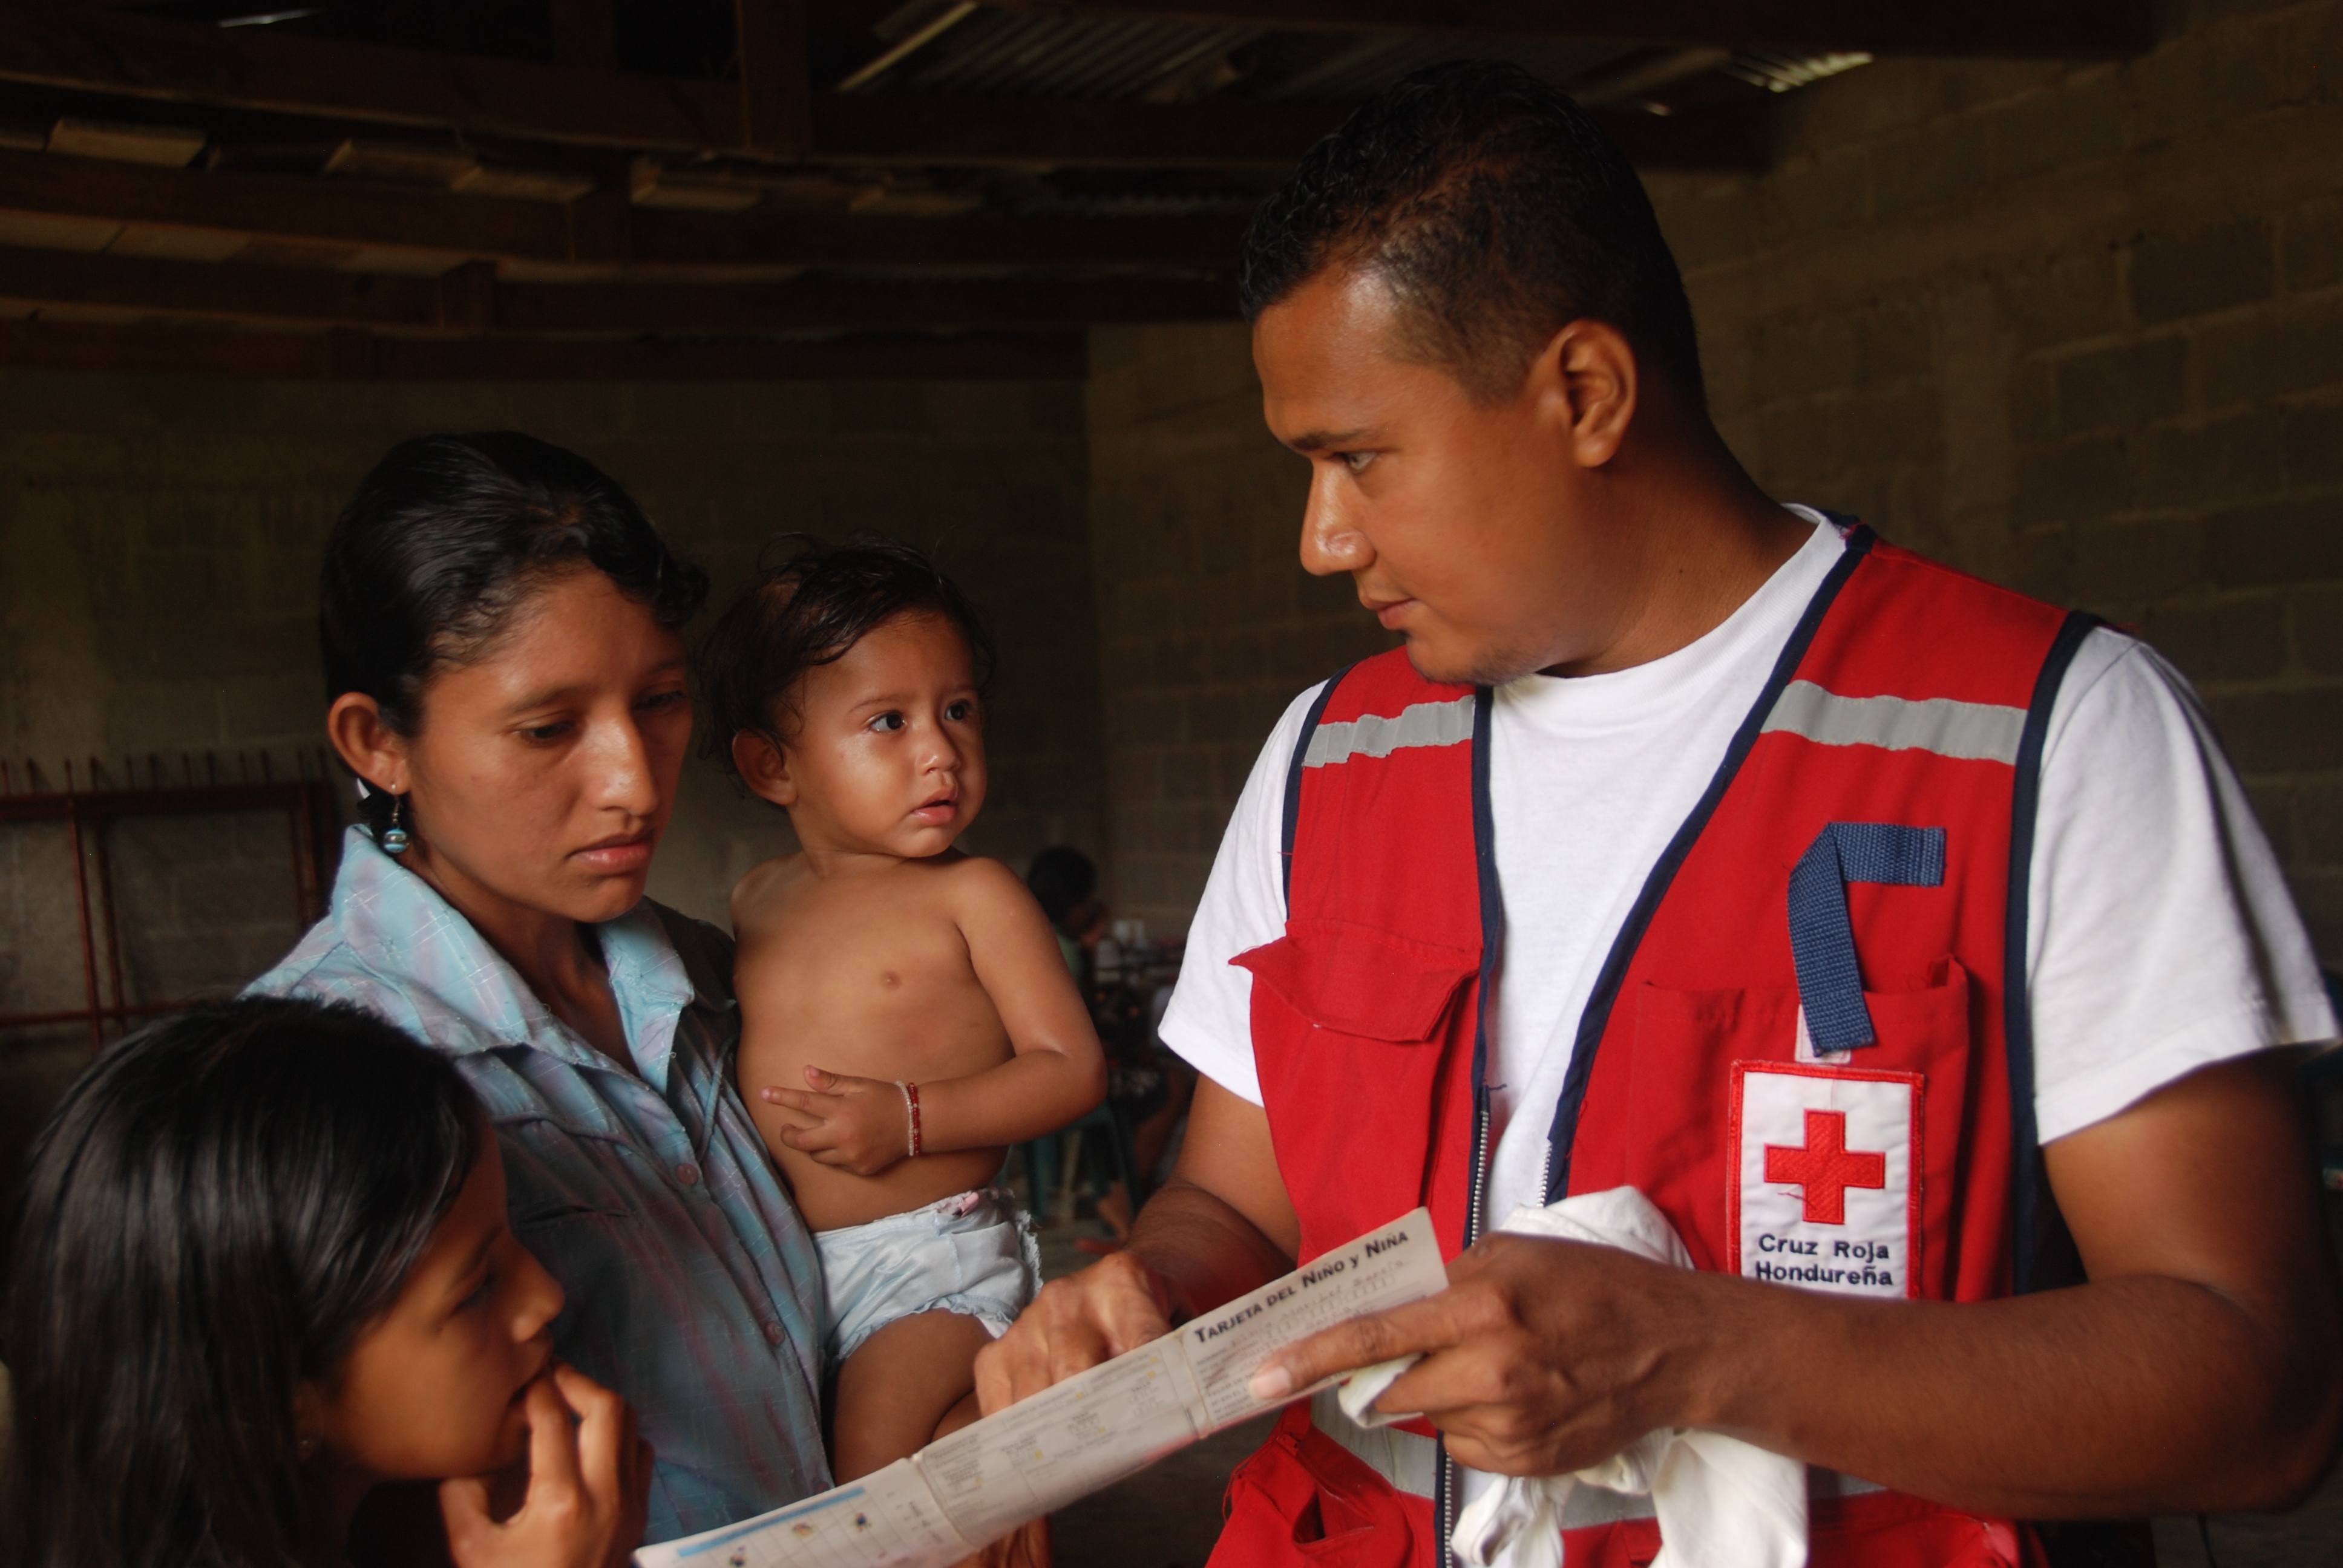 Providing nutrition counselling to families in Honduras